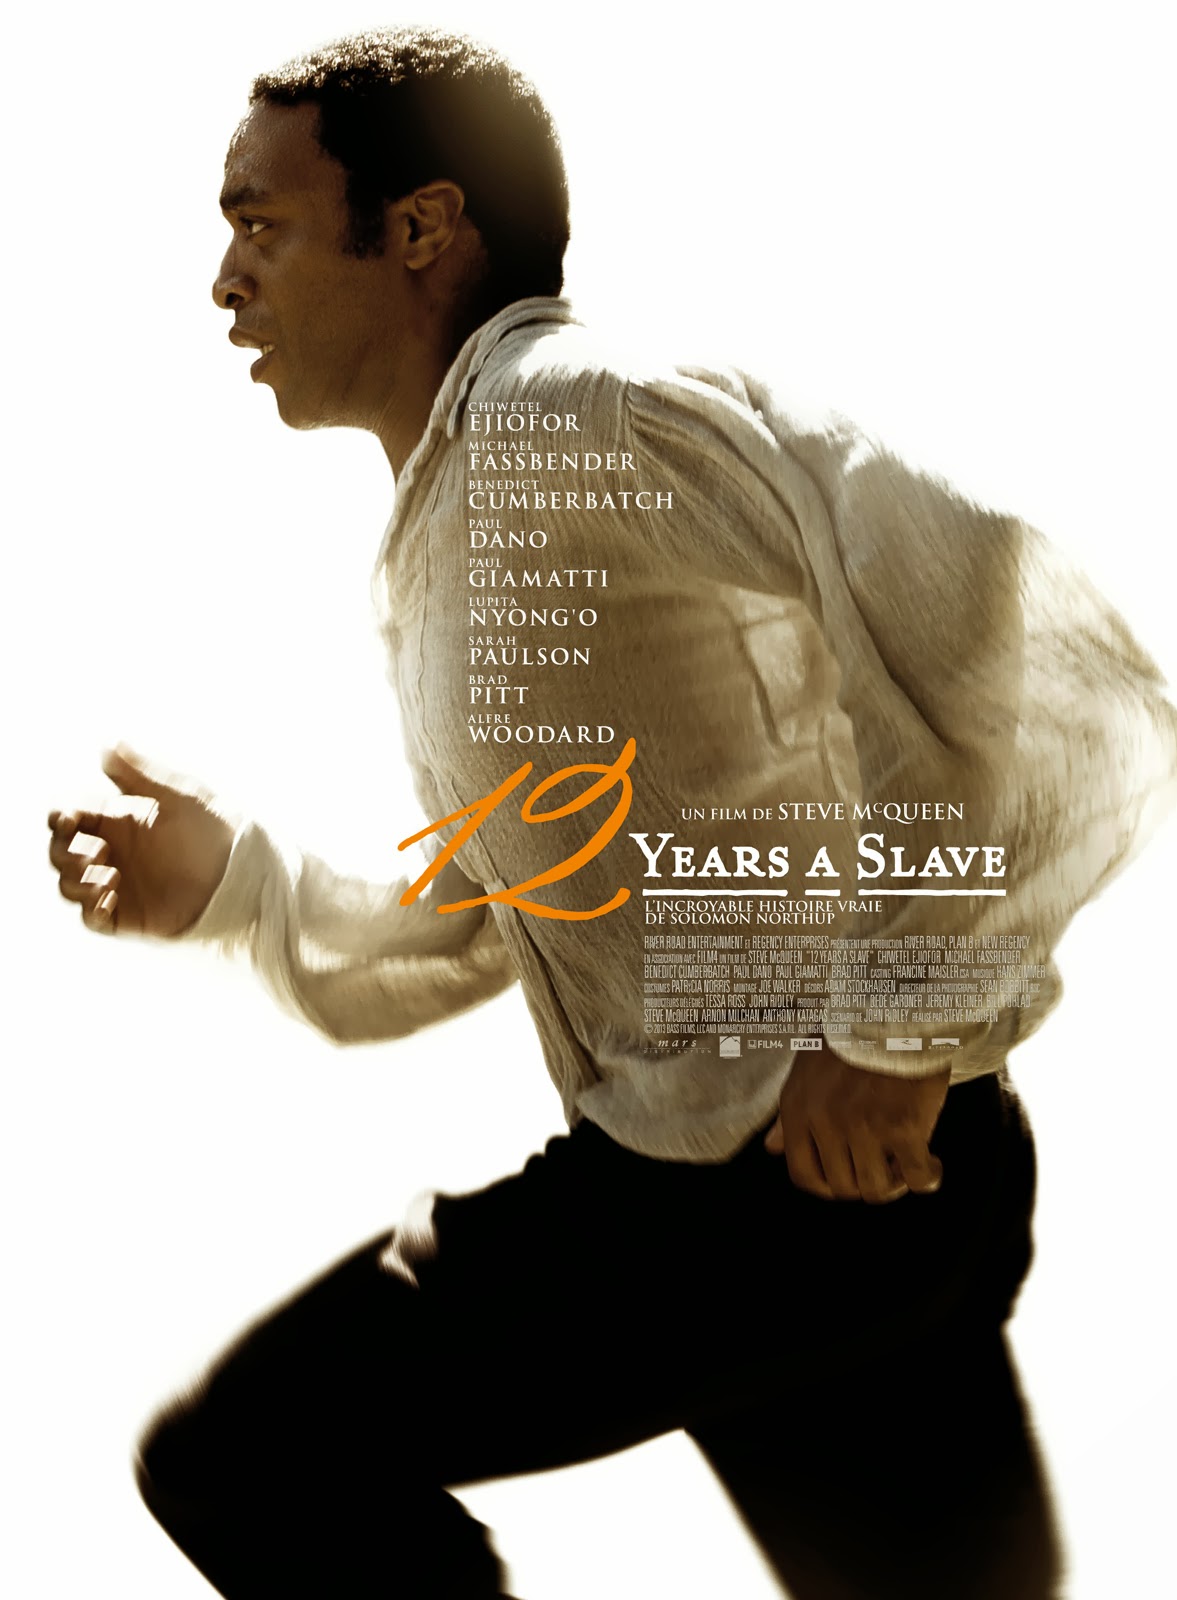 http://fuckingcinephiles.blogspot.fr/2014/01/critique-12-years-slave.html